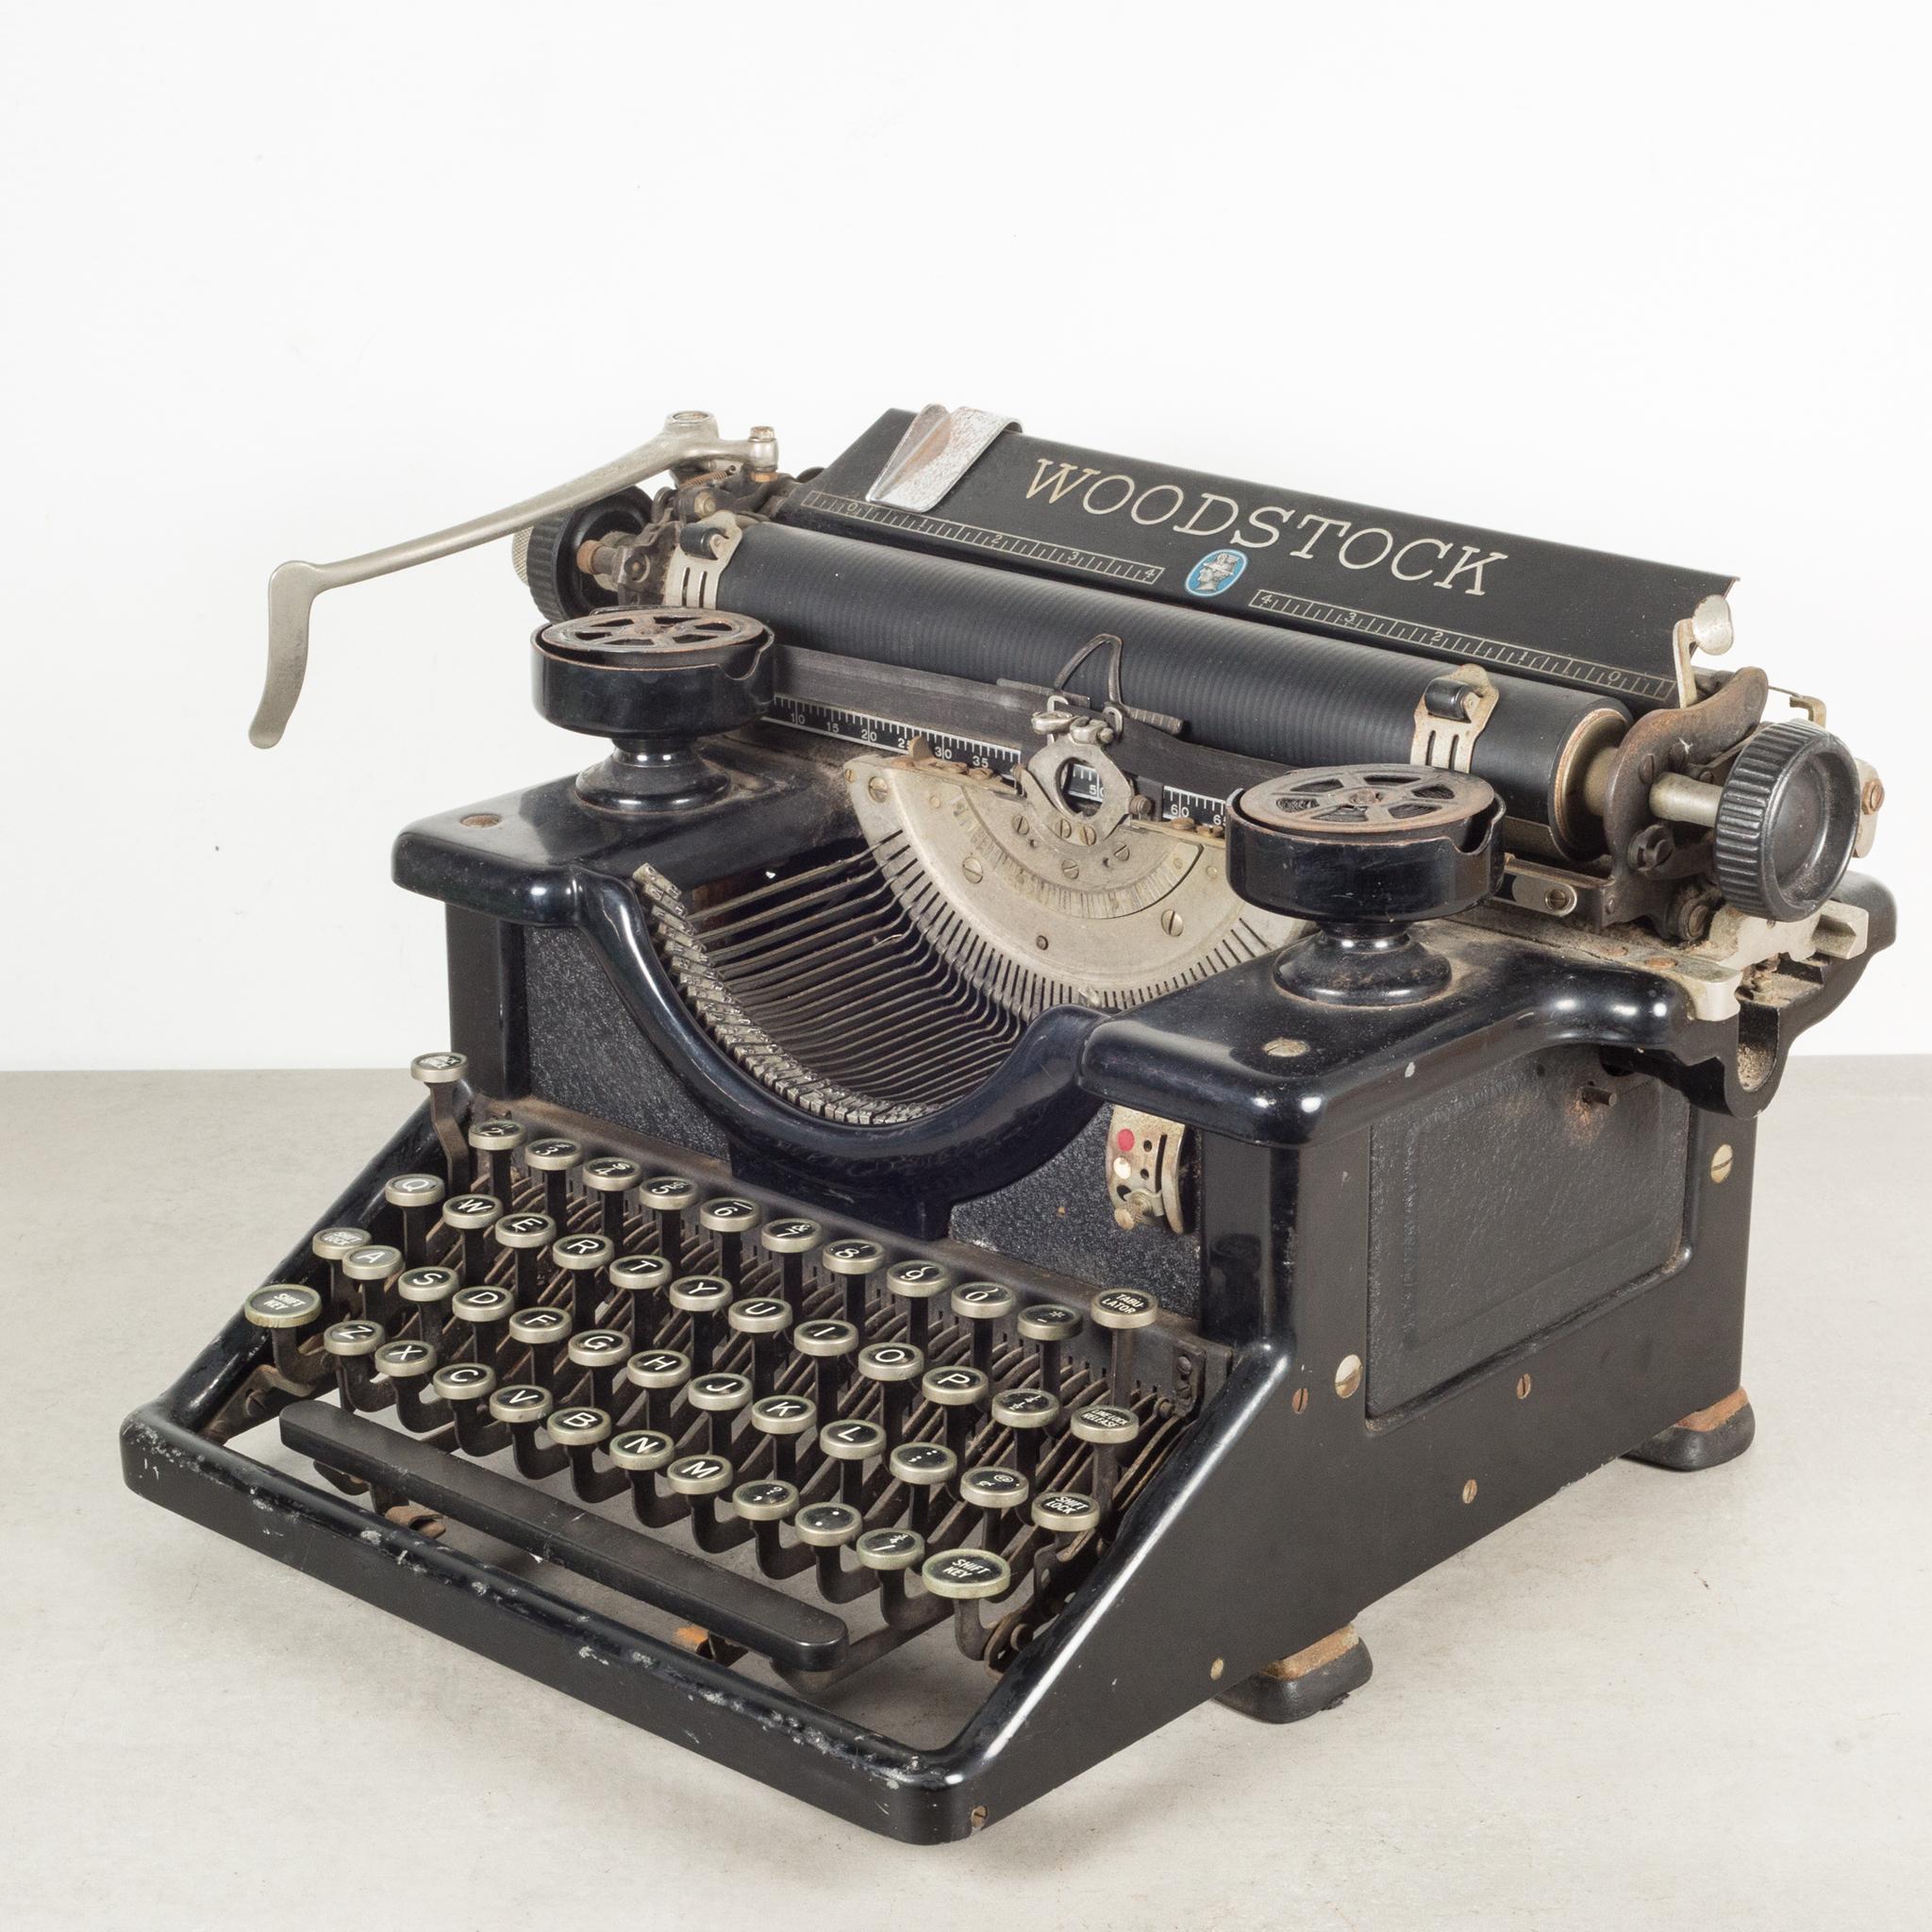 About

An antique Woodstock typewriter with a 16 inch carriage. Original decals on the front and back. The keys are nickel with black with white numbers. Four rows of keys. The carriage slides smoothly from side to side. All the keys strike